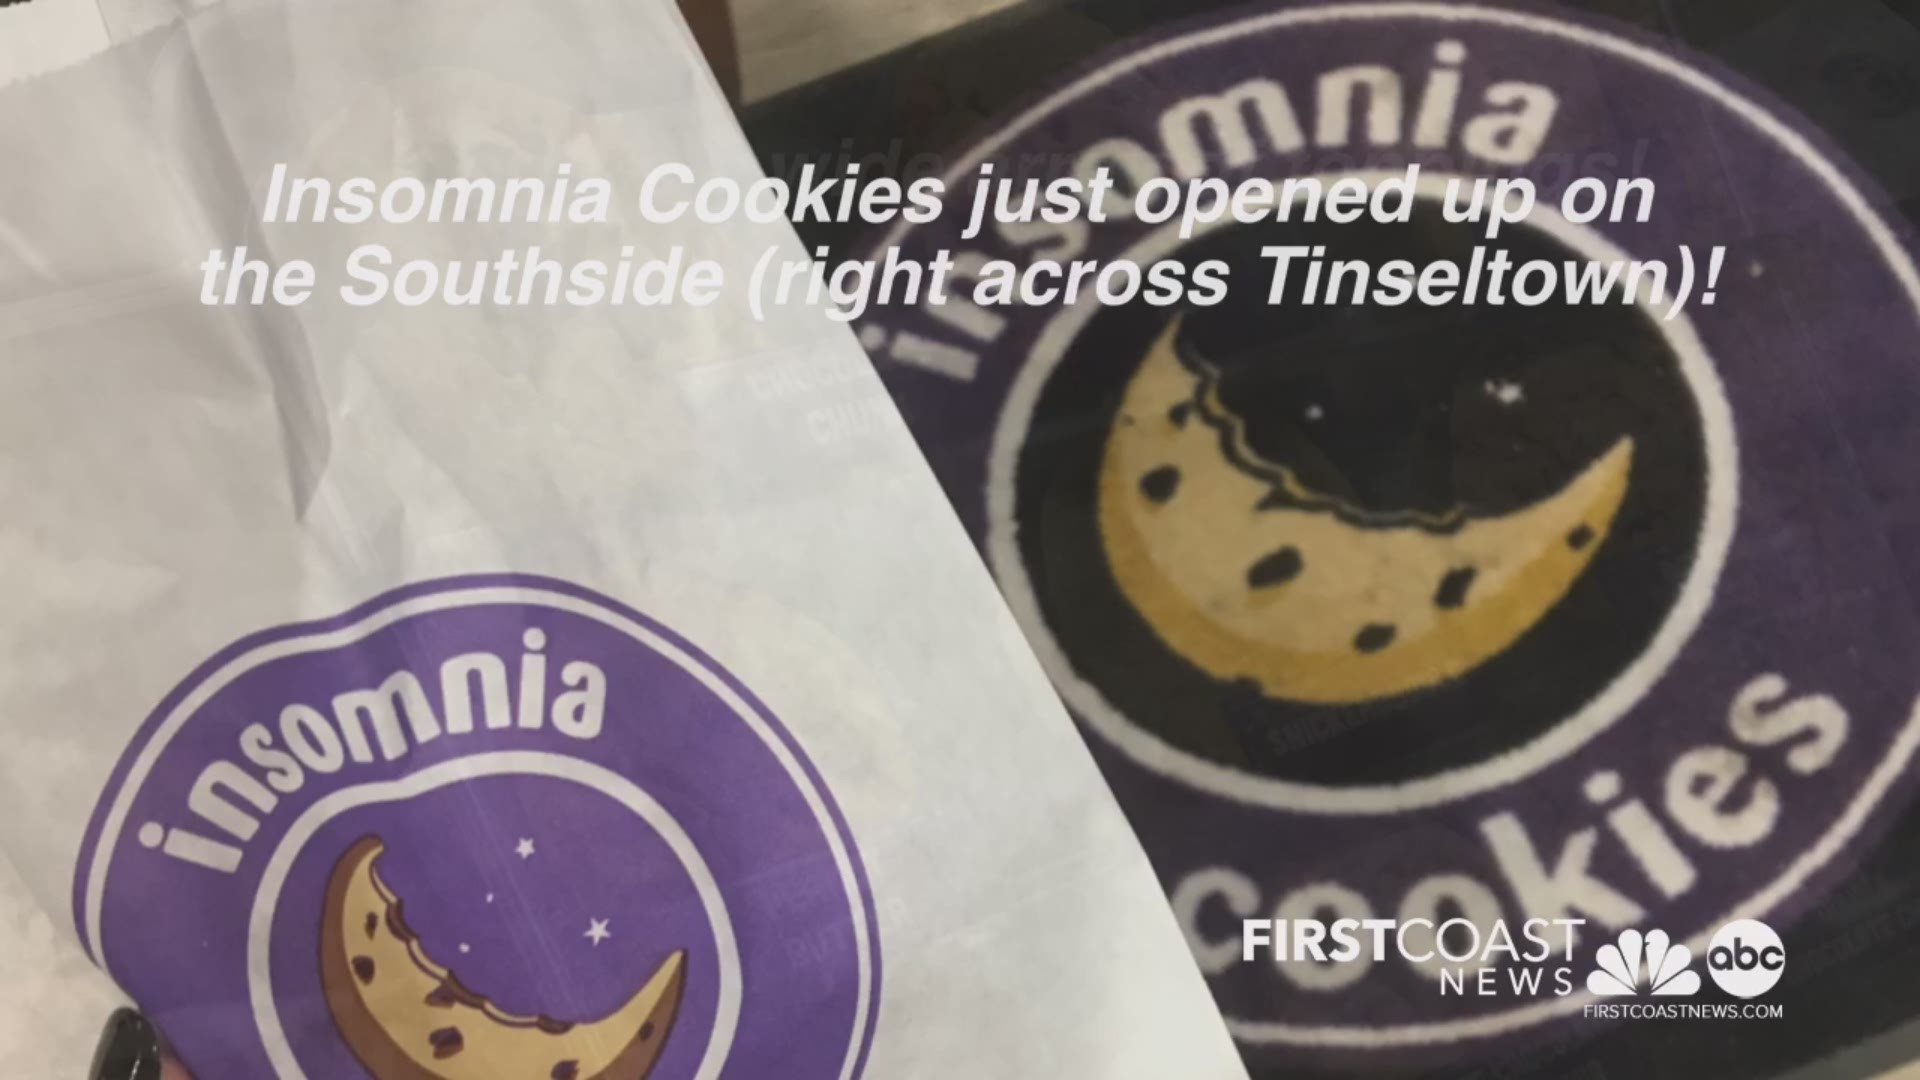 Insomnia Cookies also sells other goodies that'll satisfy your sweet tooth, such as brownies, ice cream and ice cream cookie sandwiches!